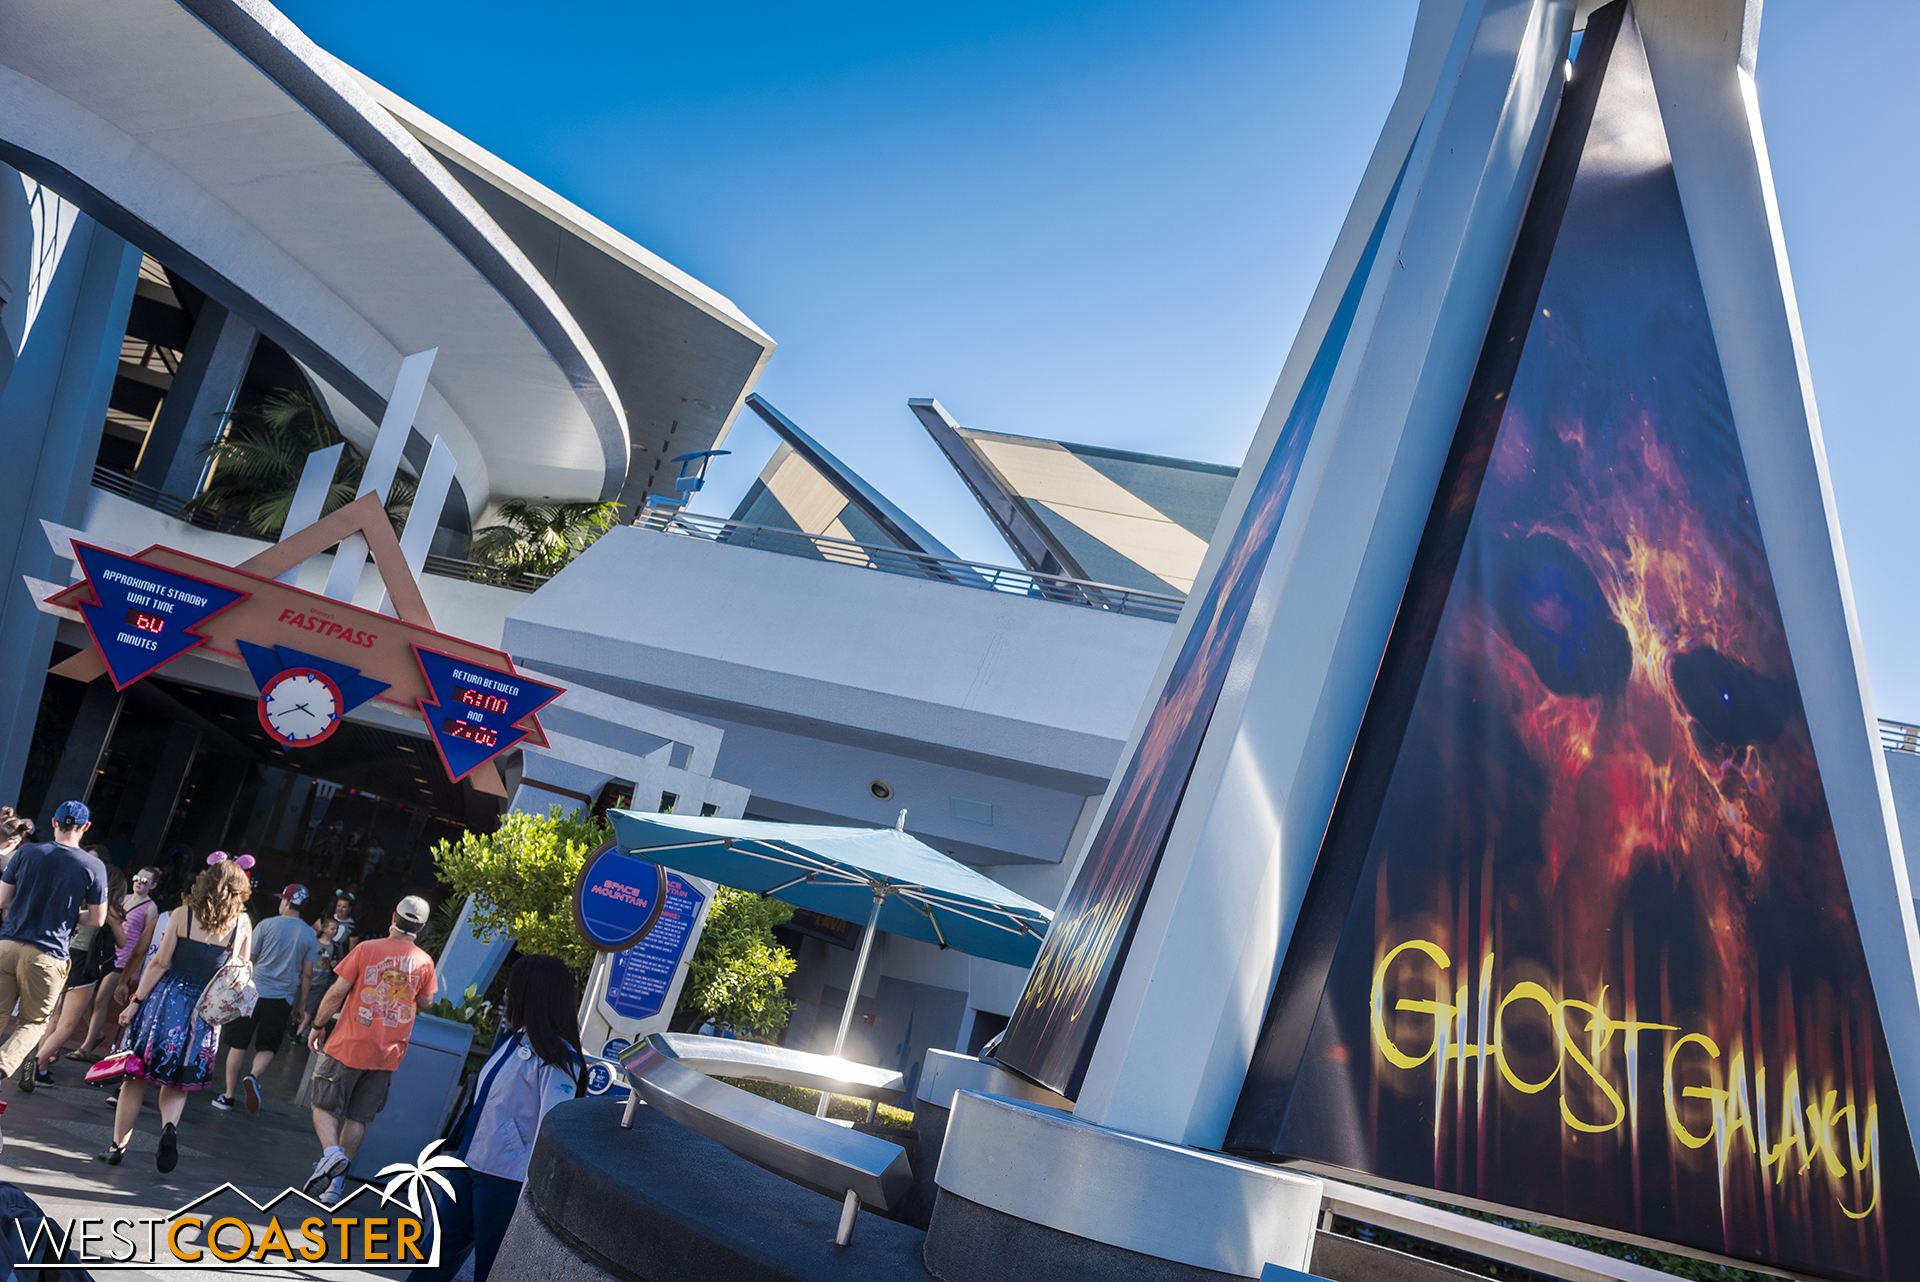  Ghost Galaxy is back, which means expect longer lines at Space Mountain than usual. 